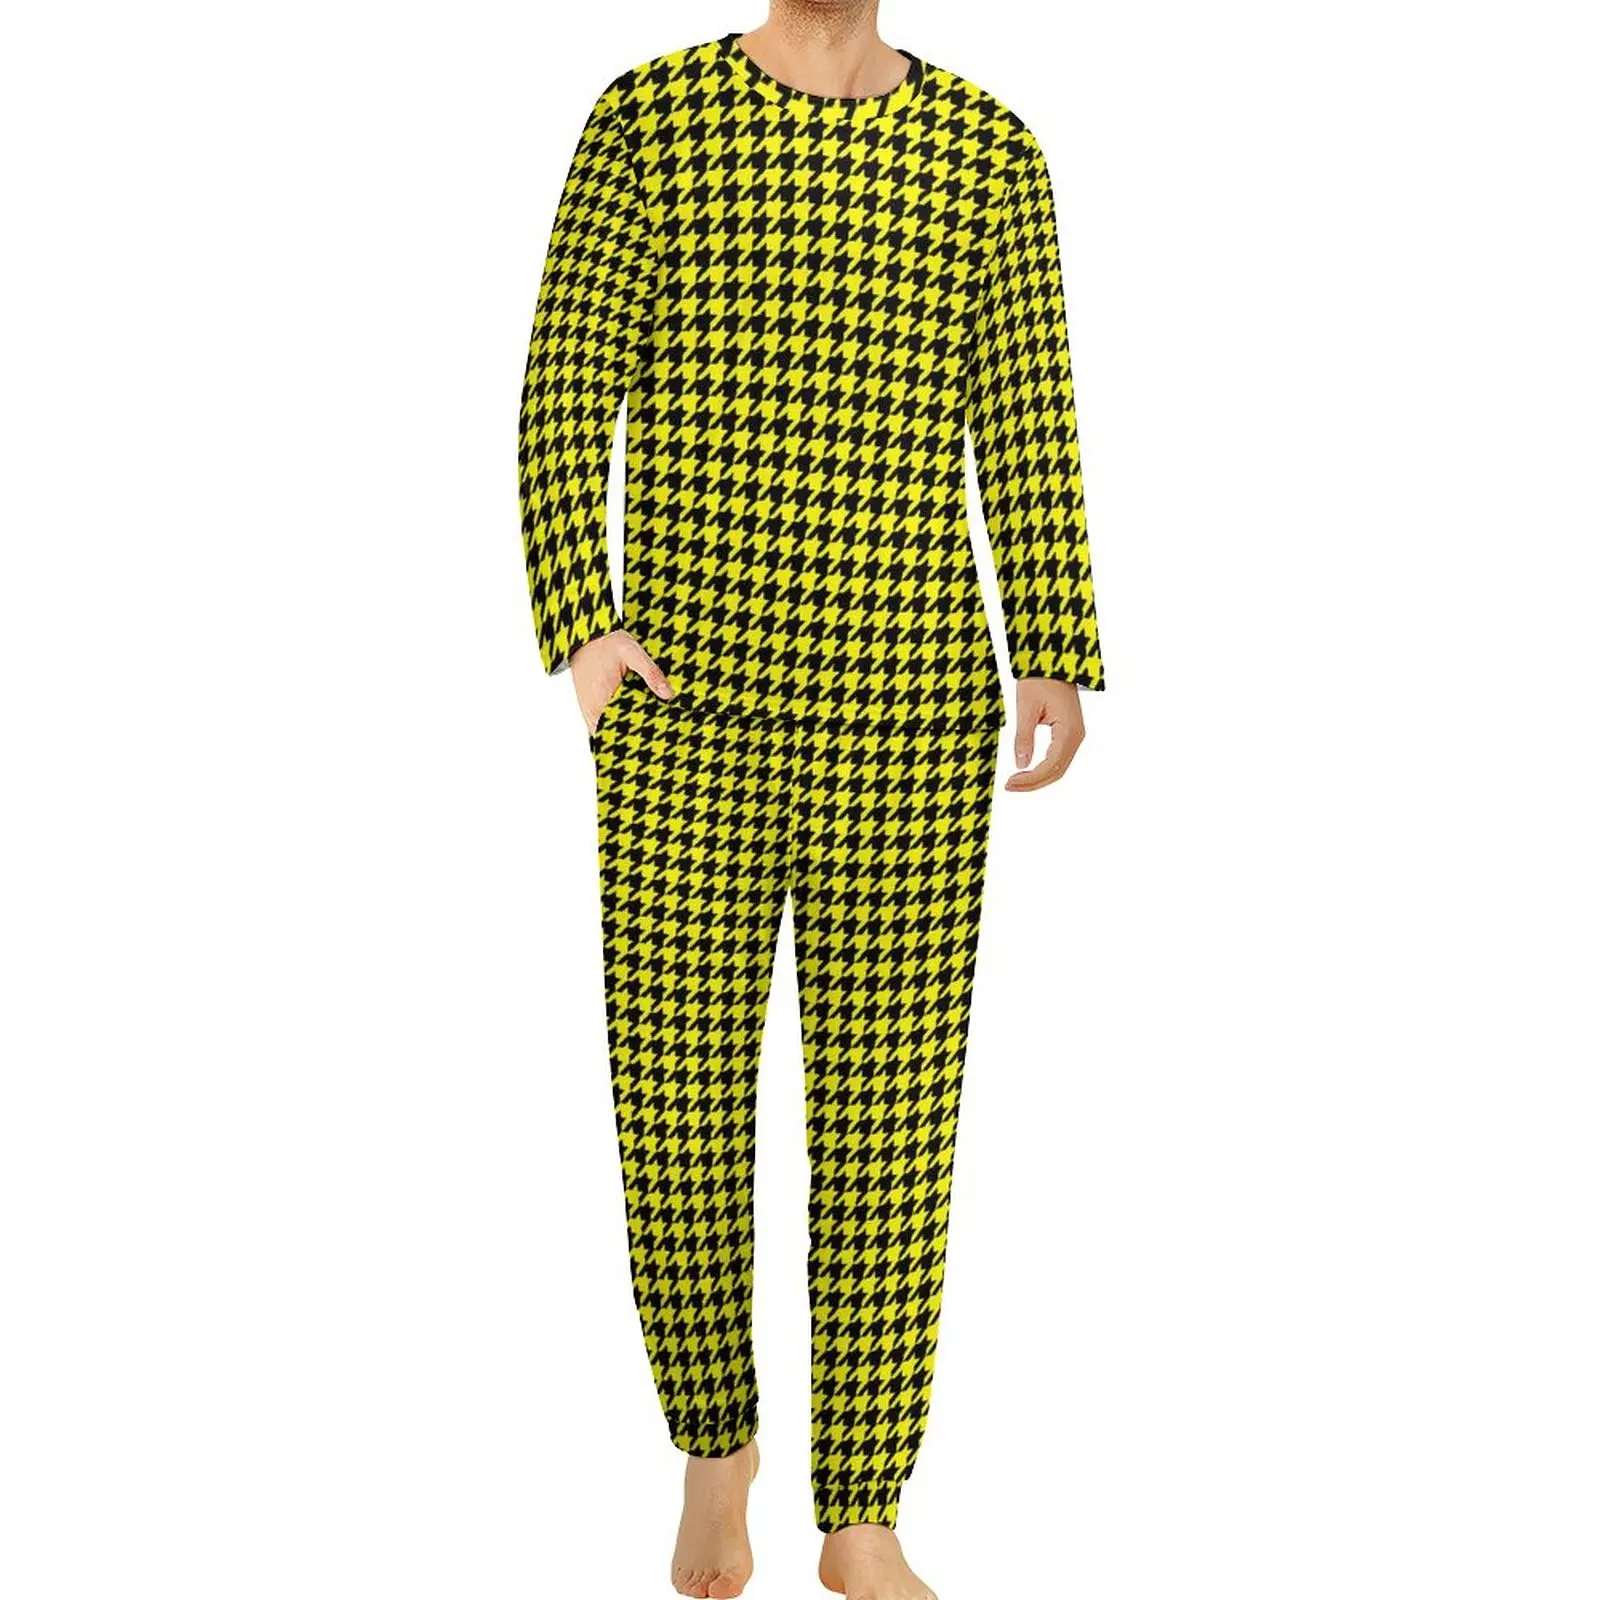 

Elegant Houndstooth Pajamas Spring Black and Yellow Casual Nightwear Men Two Piece Design Long-Sleeve Cool Oversized Pajama Sets